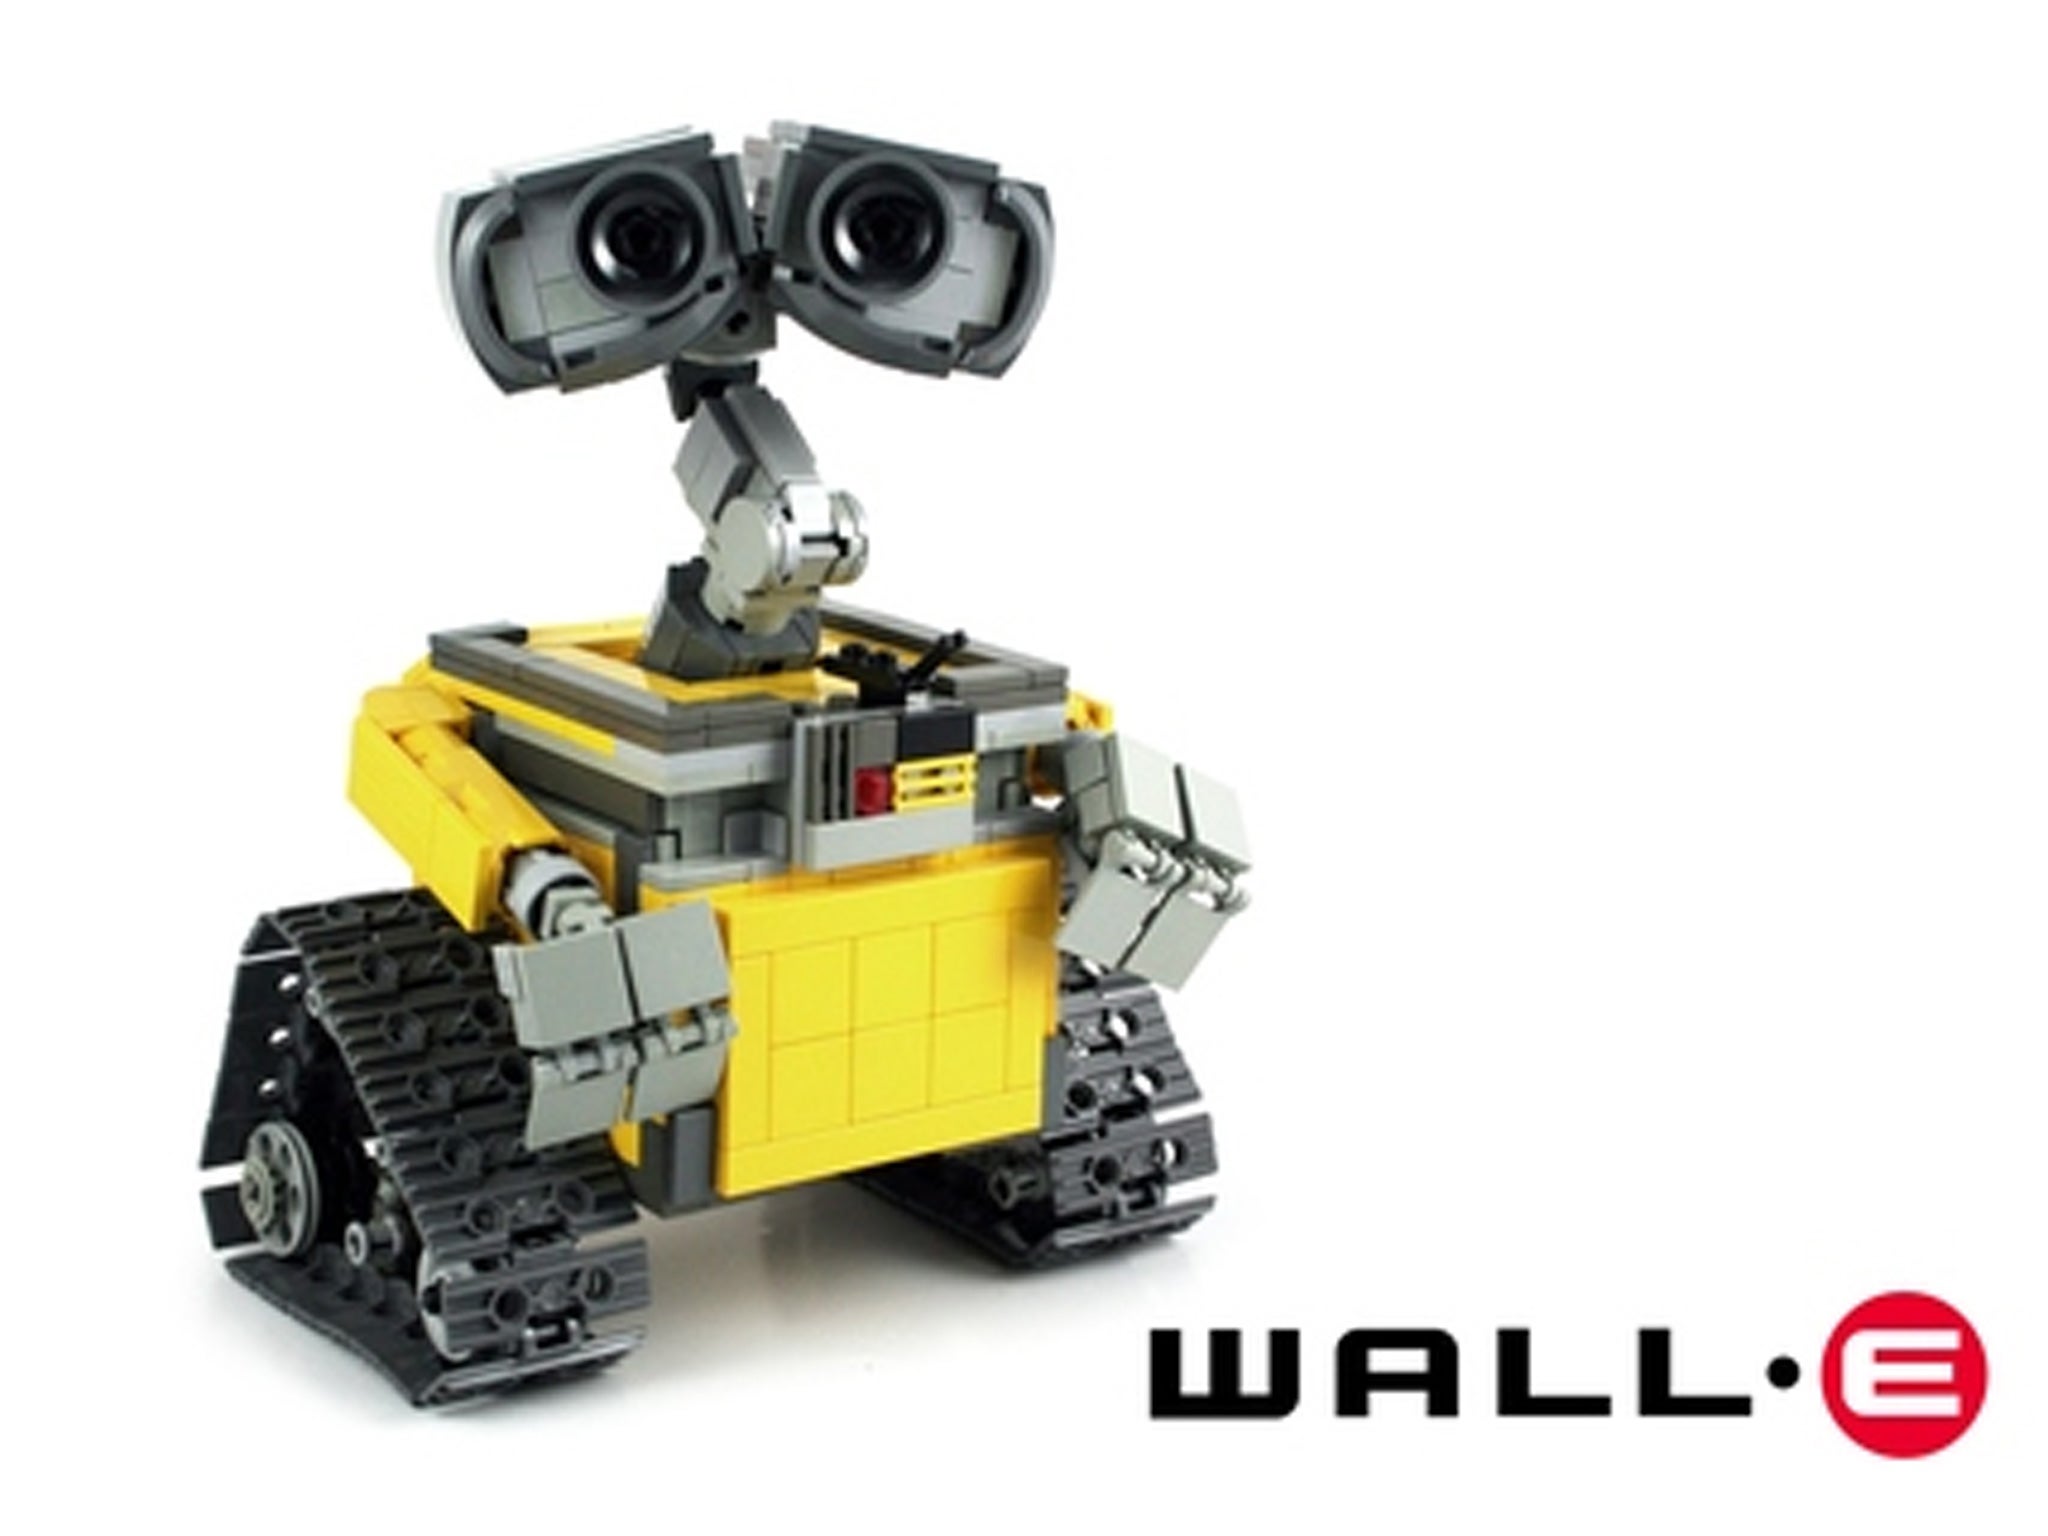 The Lego design of Wall-E, created by the lead animator on the film Angus MacLane